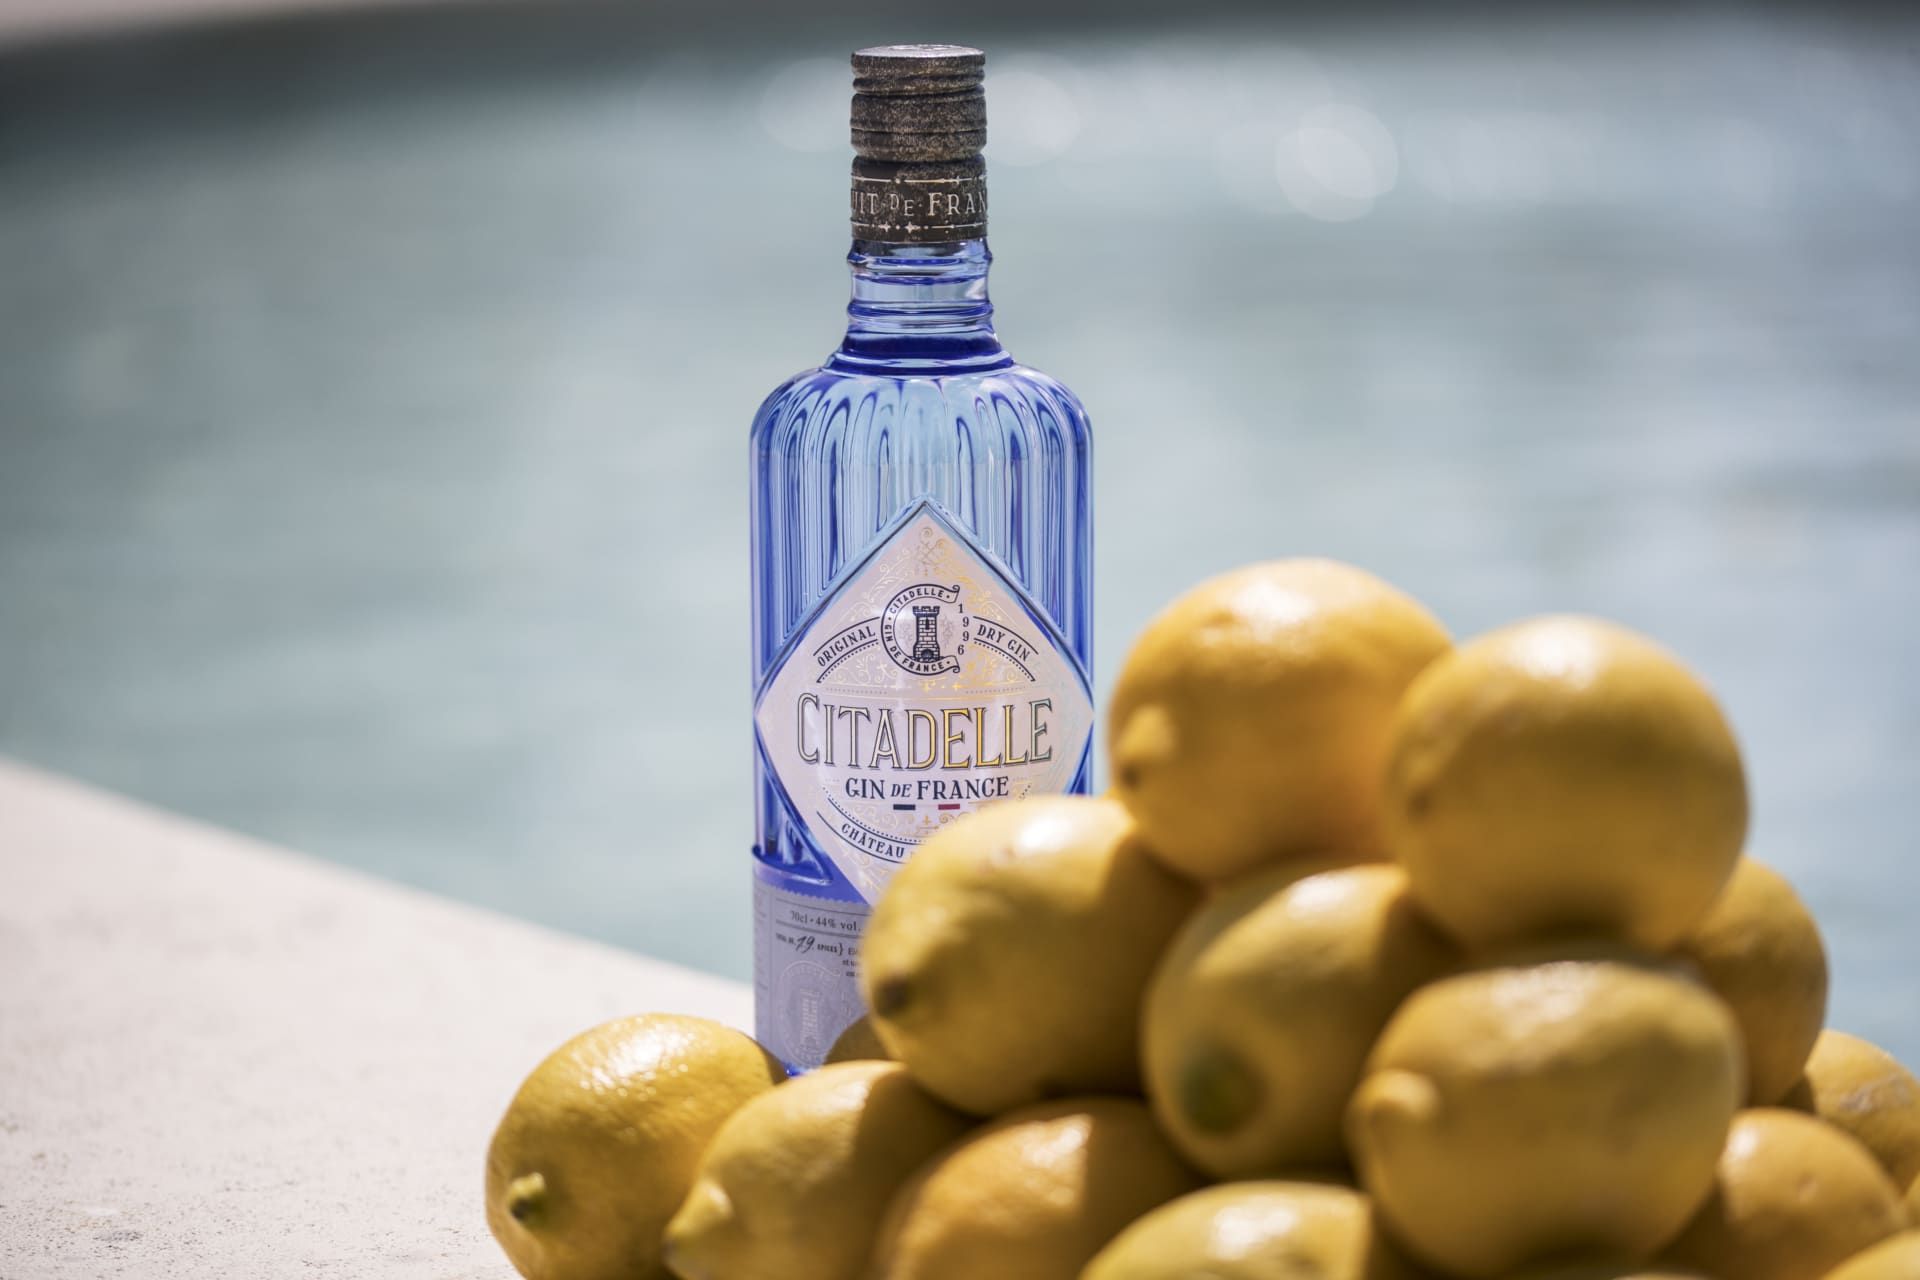 Citadelle Gin | Best Gin Gin, Pionnier In France Brand French Citadelle | Gin of